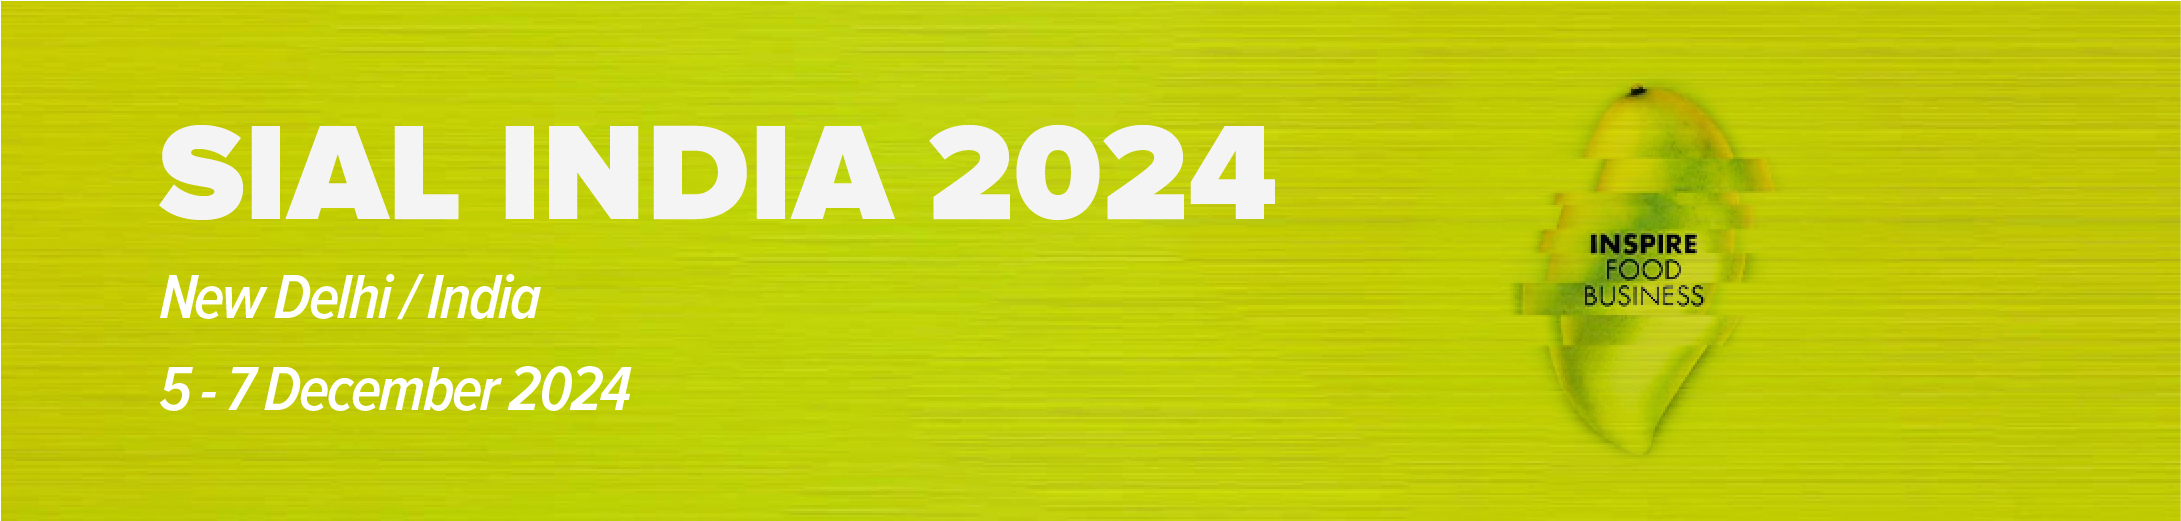 SIAL INDIA 2024 